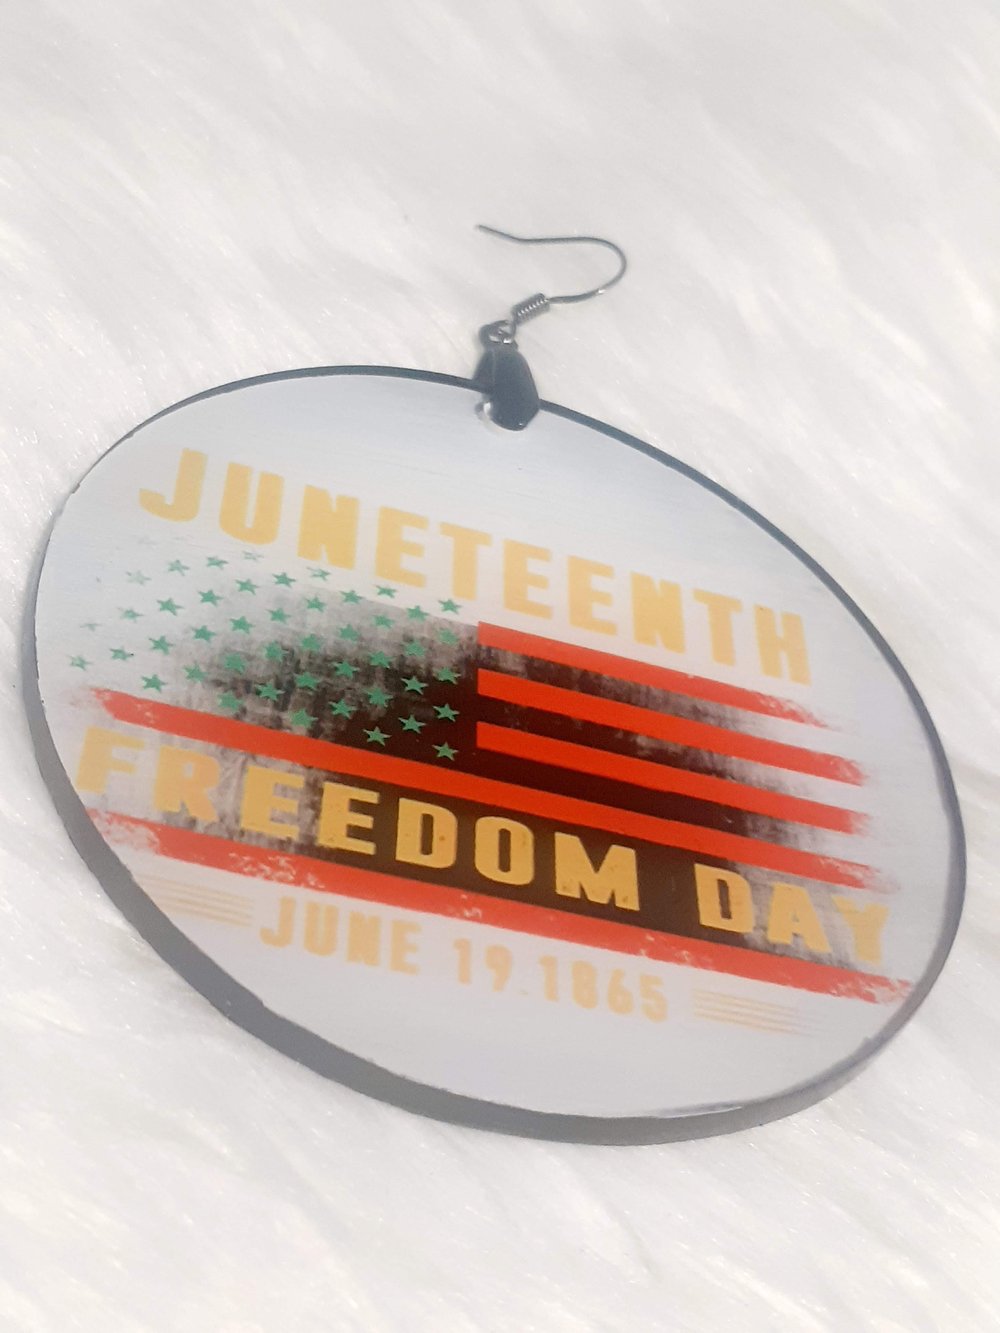 Image of  Juneteenth, Freedom Day, Black History, Black Queen, Black Girl Magic, Sublimation Earrings